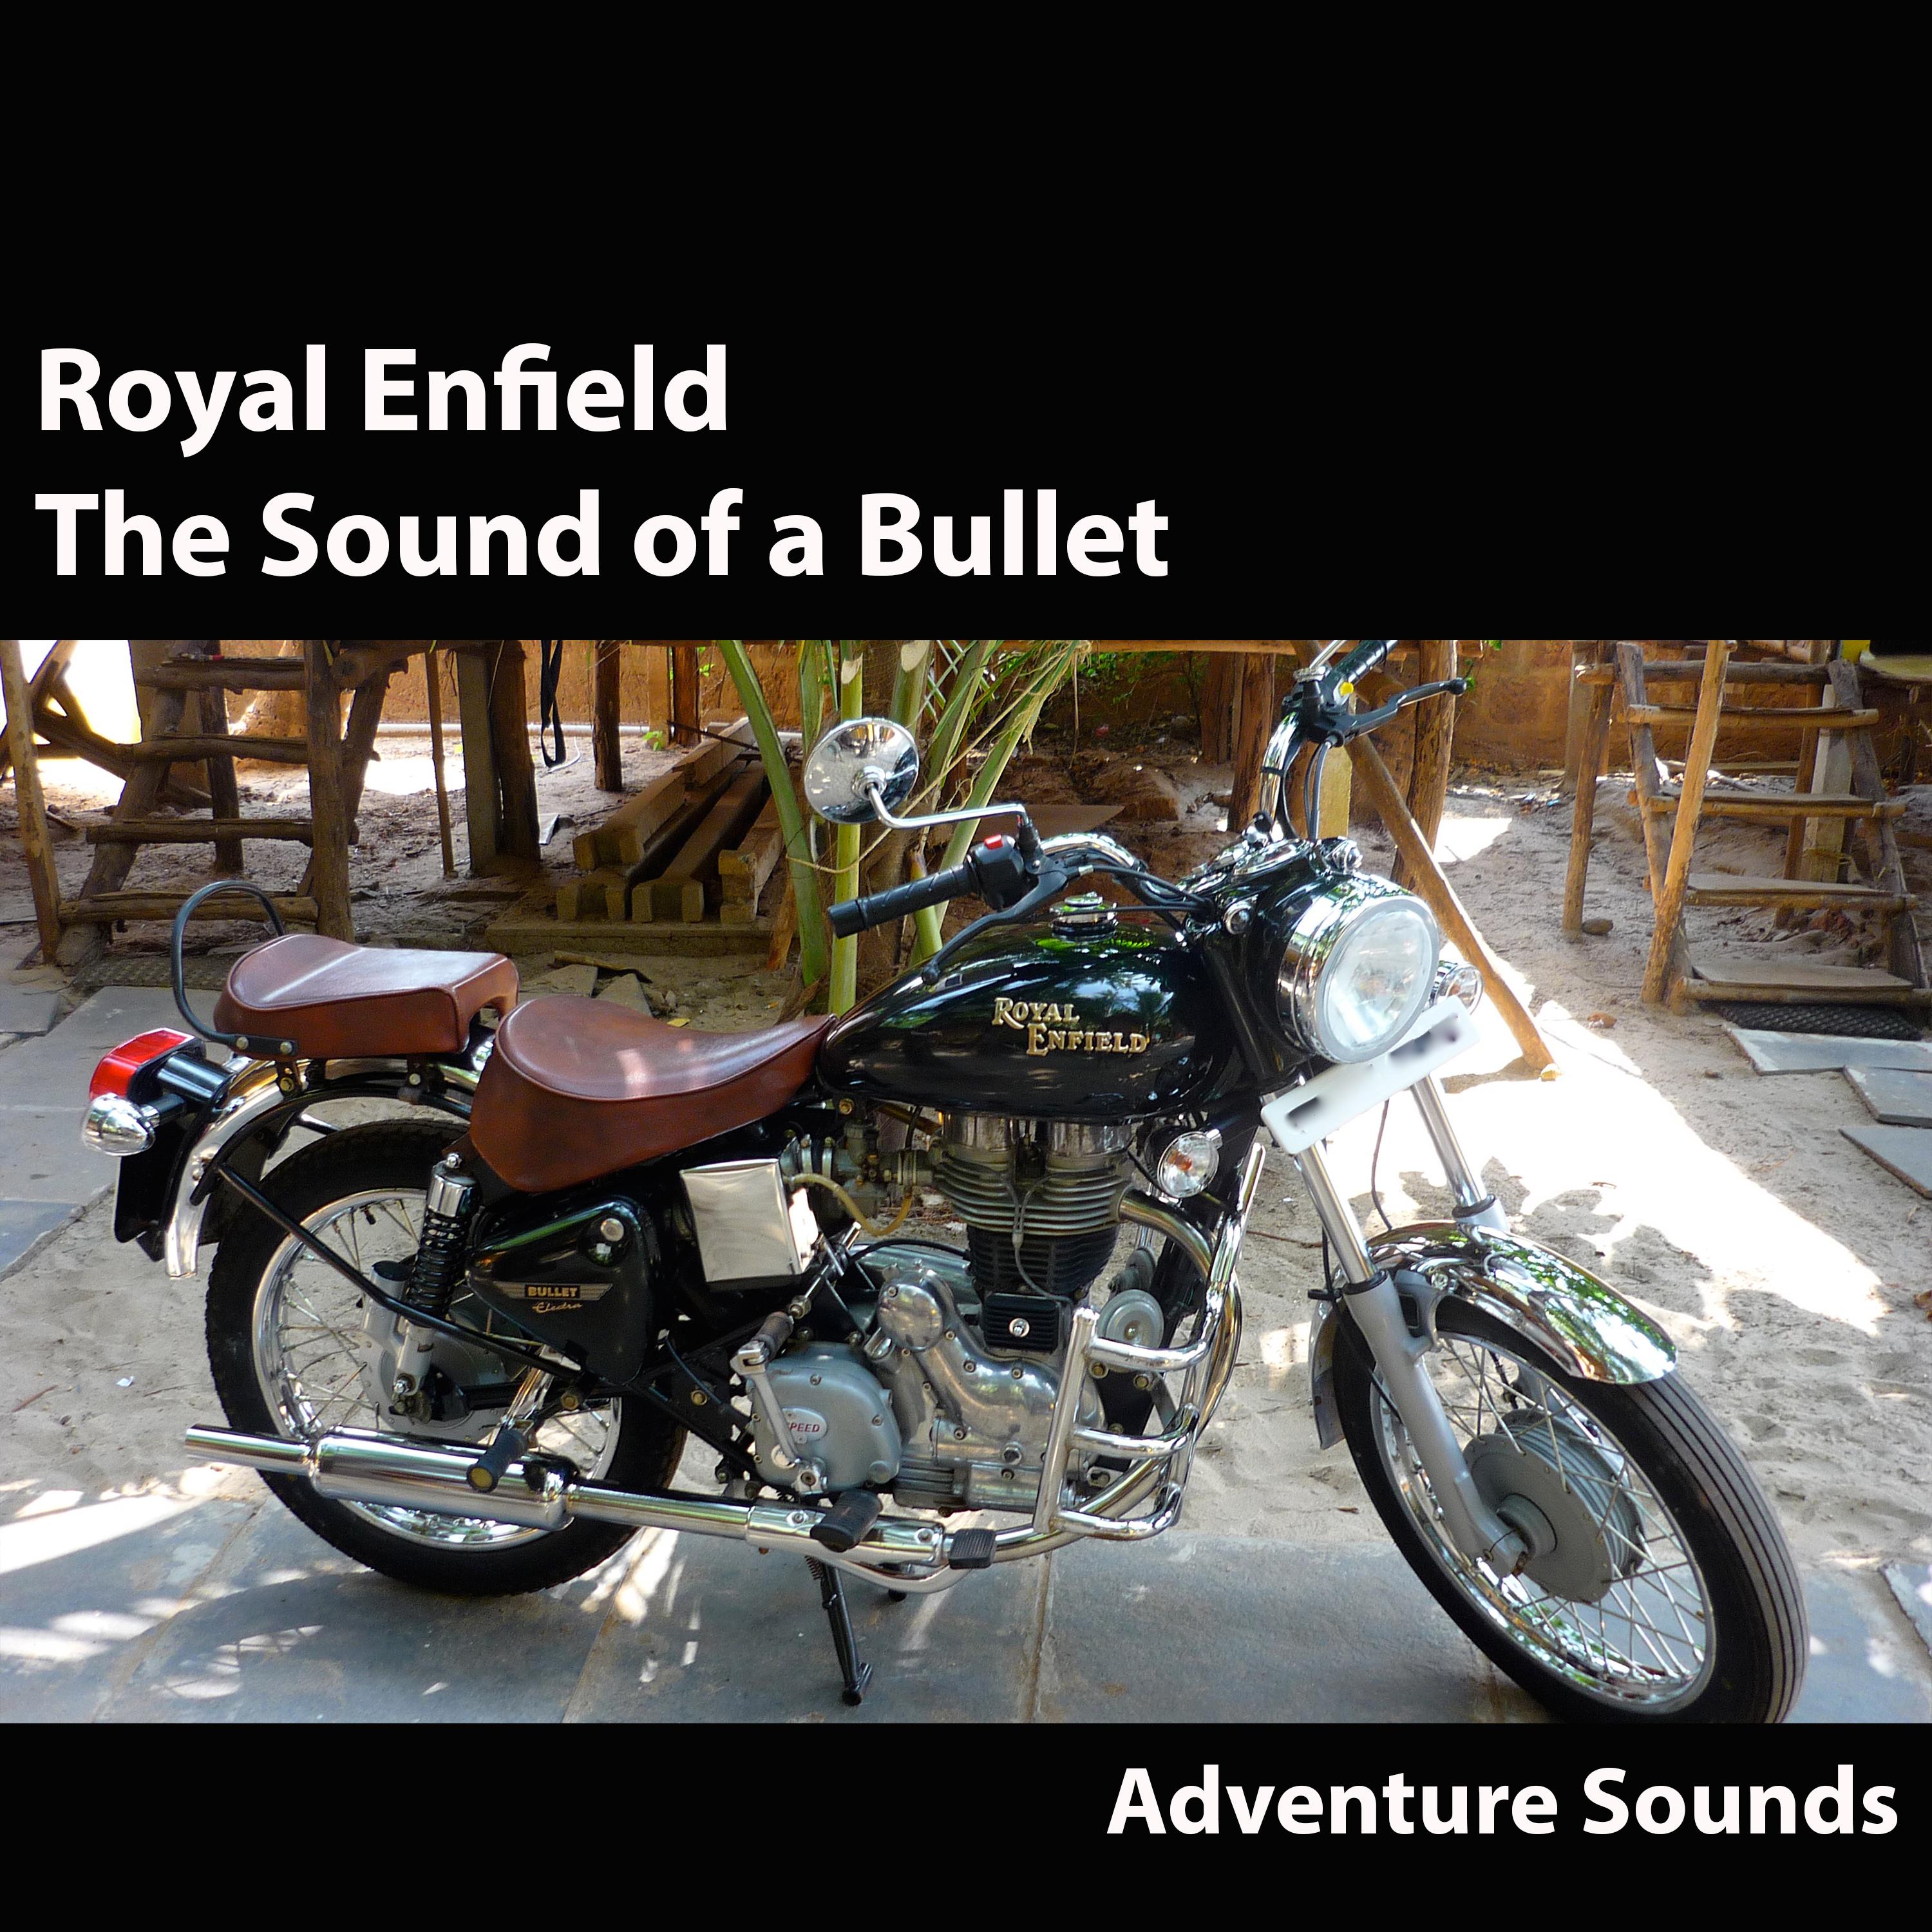 Royal Enfield - The Sound of a Bullet